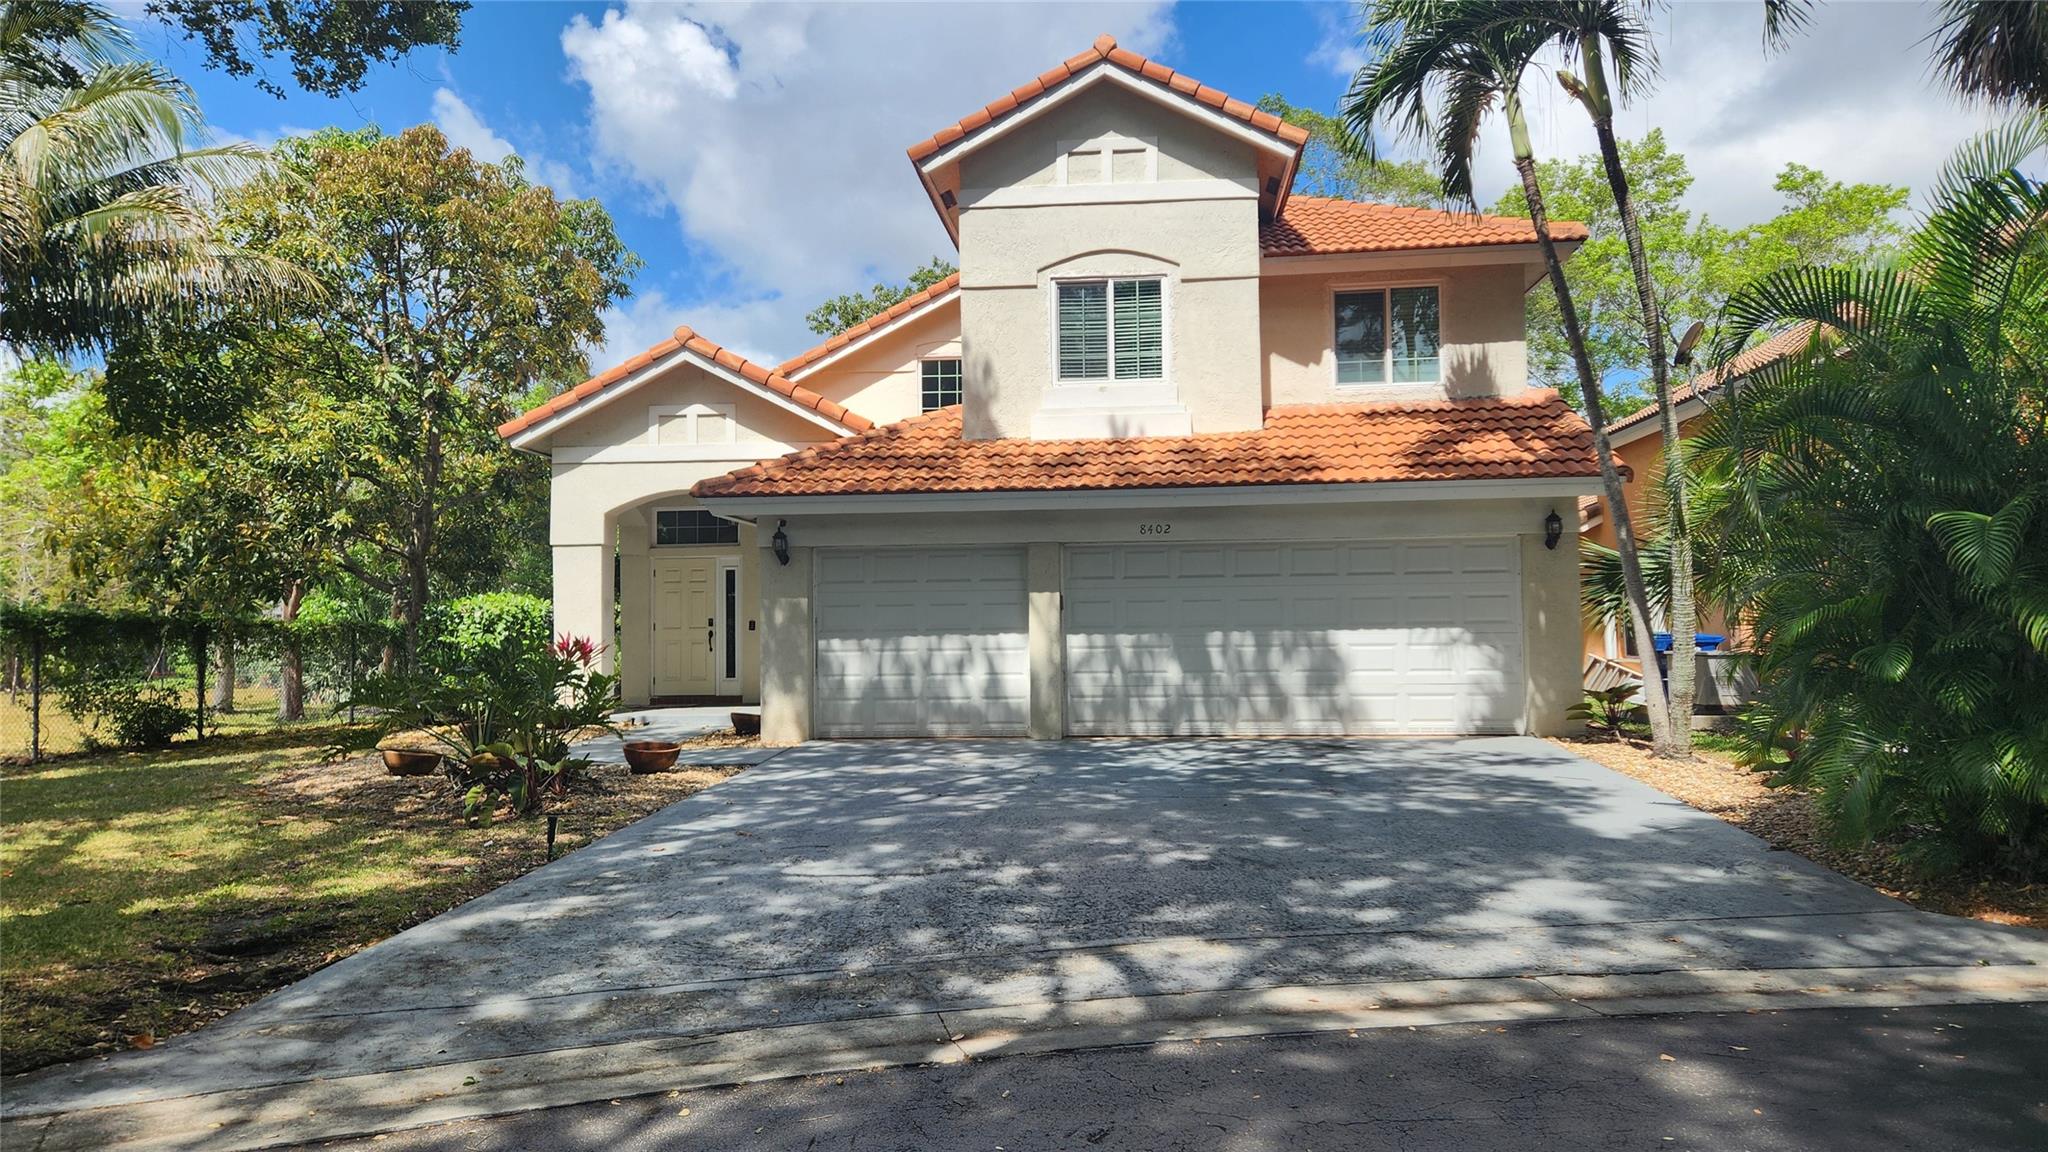 8402 NW 57th Dr, Coral Springs, FL 